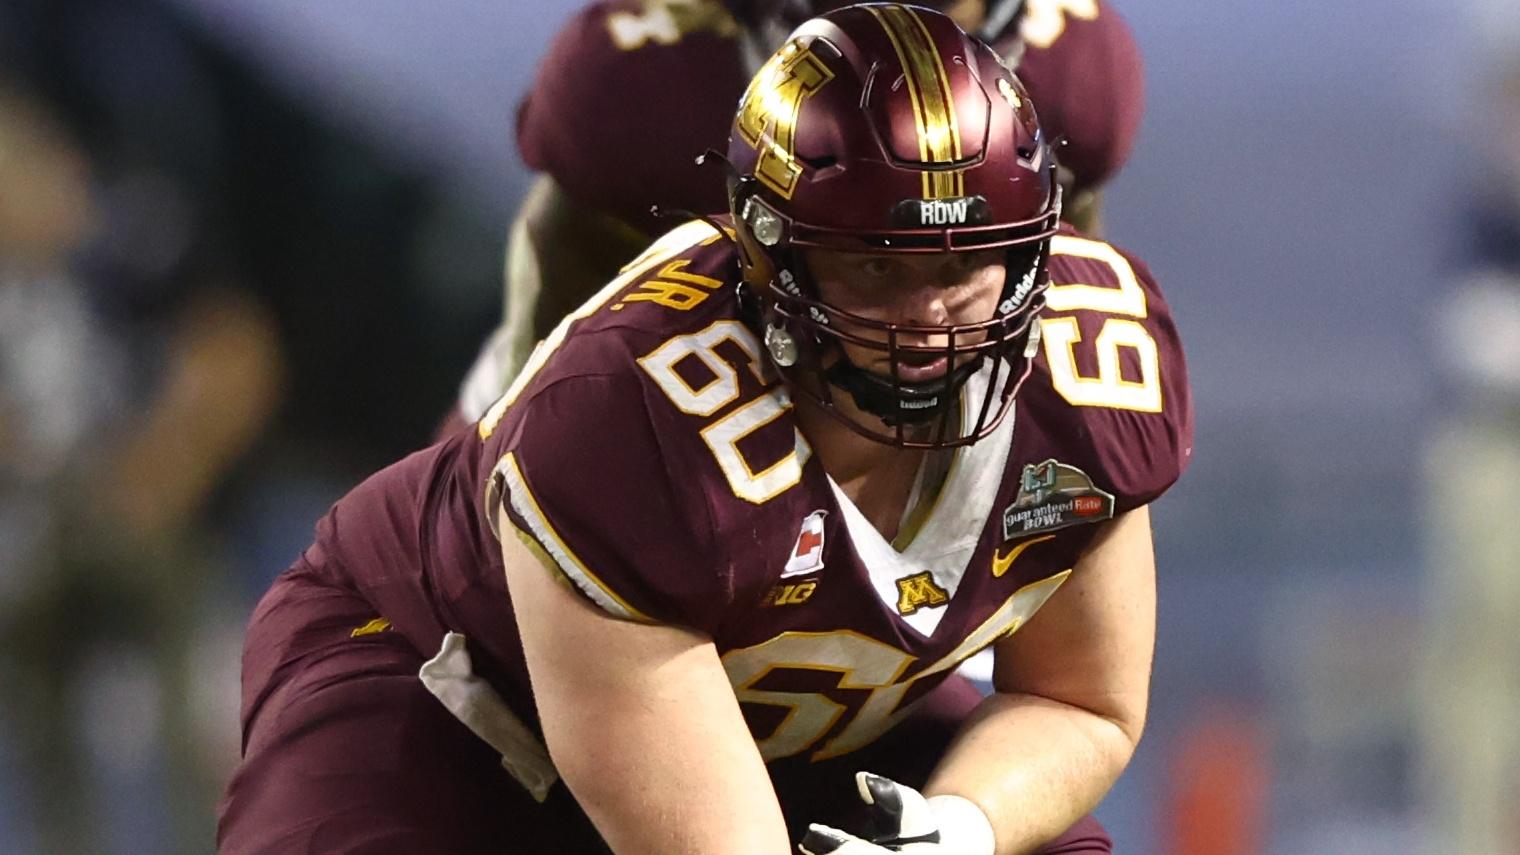 Dec 28, 2021; Phoenix, AZ, USA; Minnesota Golden Gophers center John Michael Schmitz (60) against the West Virginia Mountaineers in the Guaranteed Rate Bowl at Chase Field / Mark J. Rebilas-USA TODAY Sports